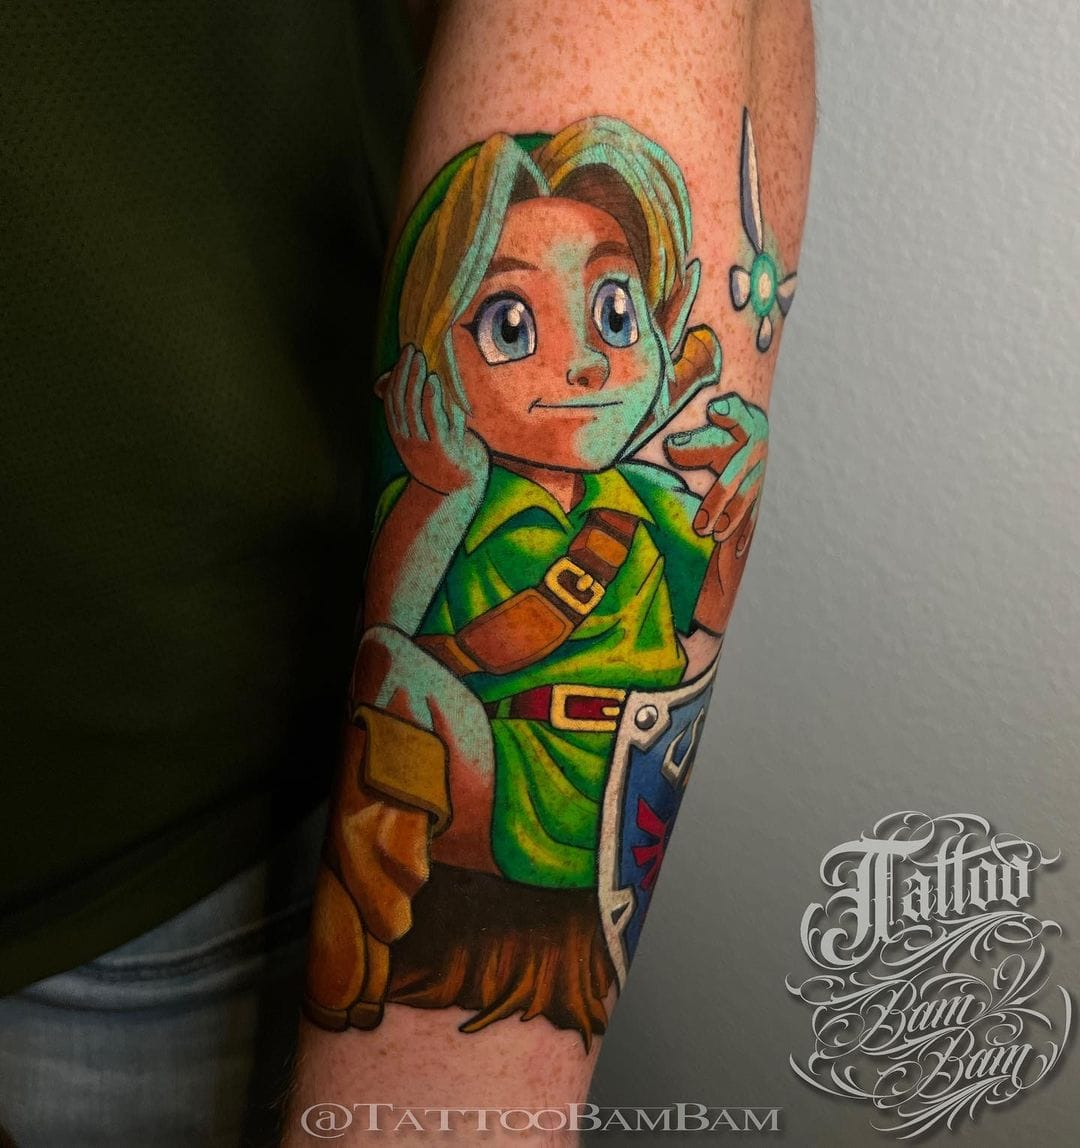 Tattoos and video games